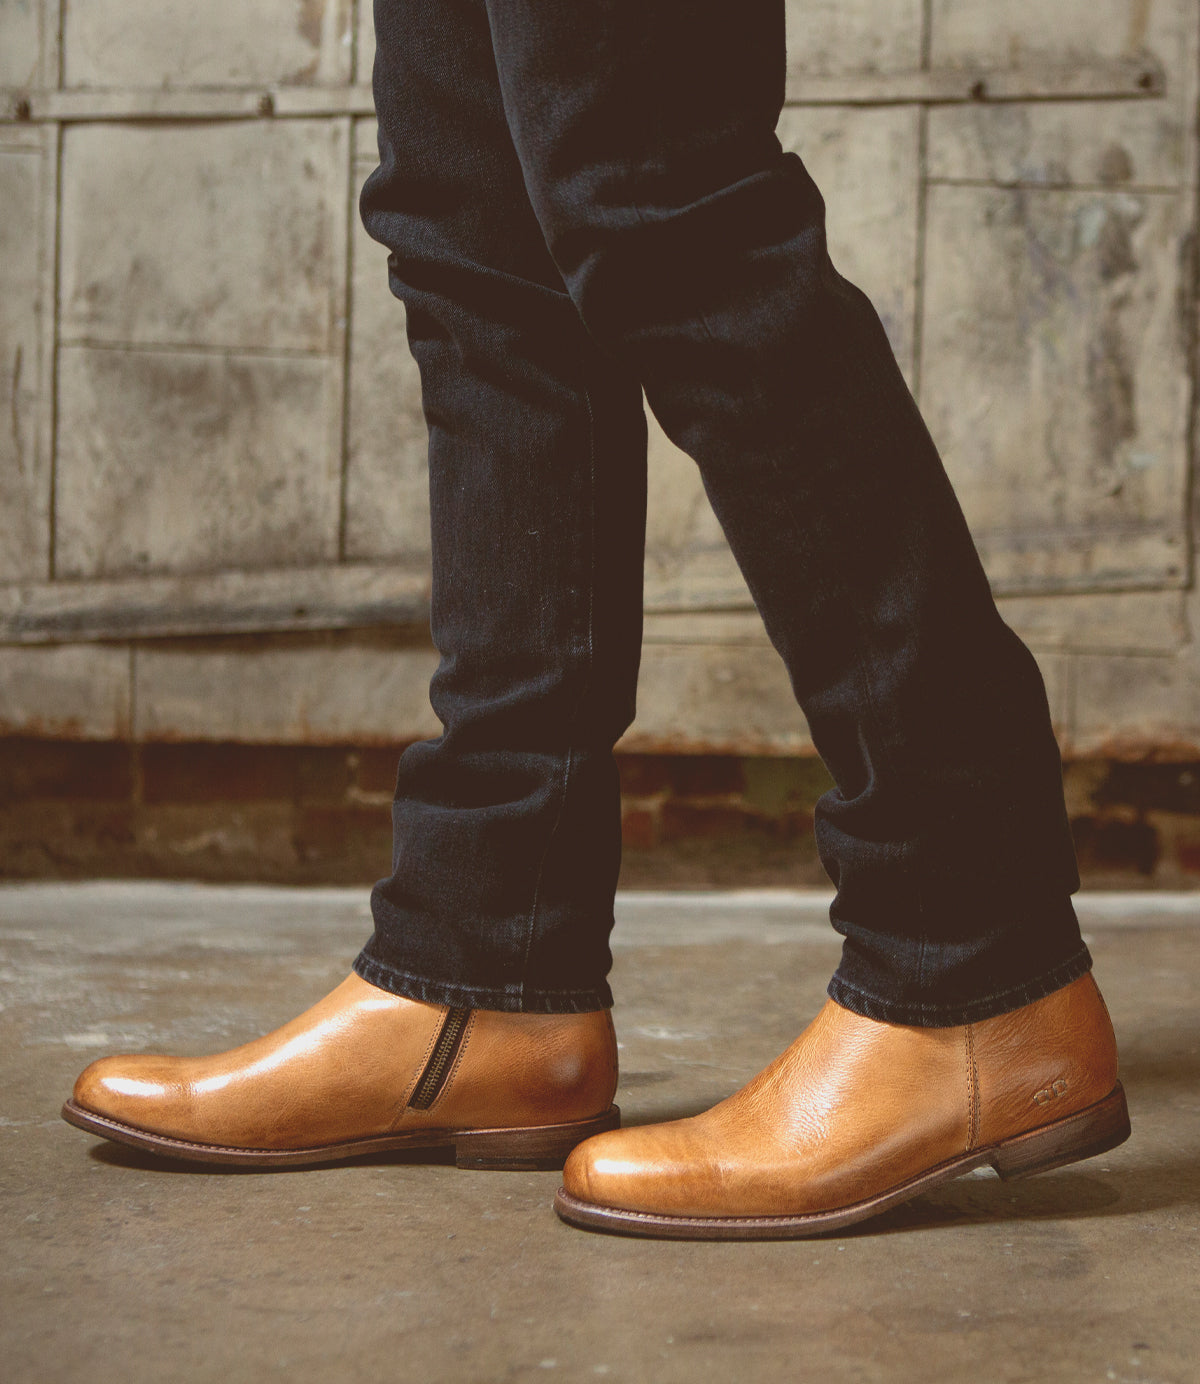 A person standing in Bed Stu Kaldi Tan Rustic Boots and dark jeans against a brick wall background.